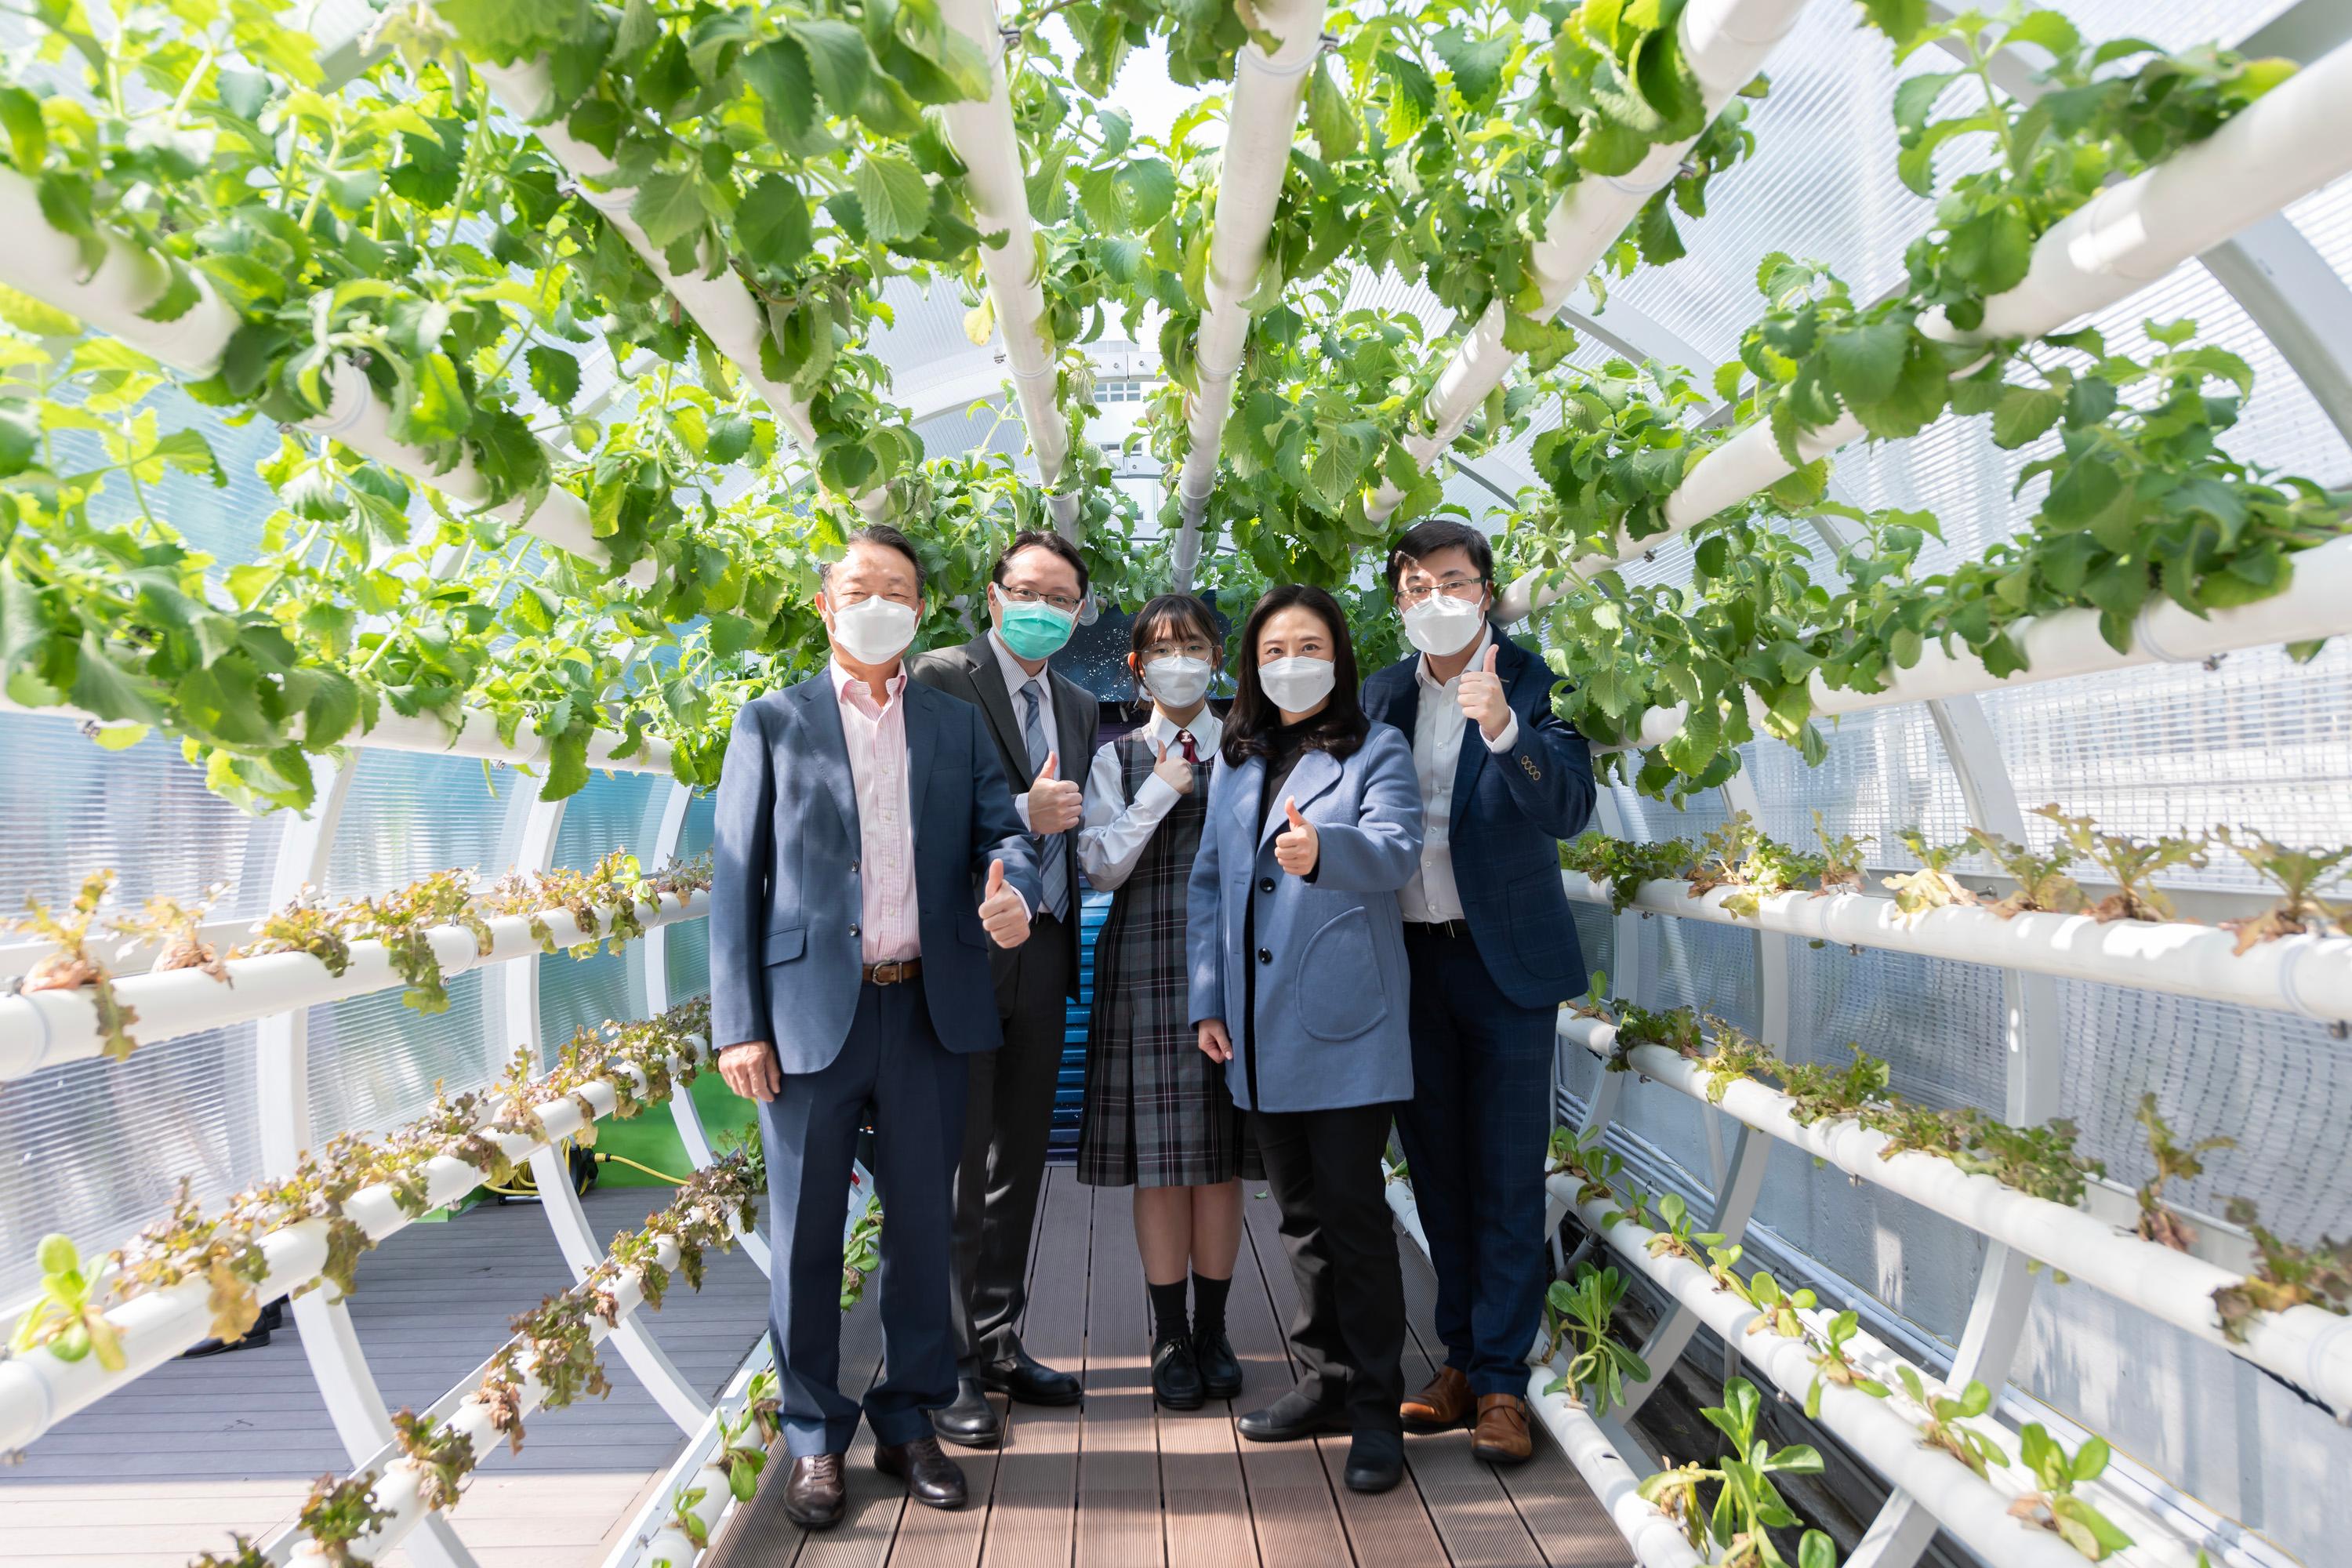 The Legislative Council Subcommittee on Matters Relating to the Development of Smart City visited the HKSKH Bishop Hall Secondary School today (February 24). Photo shows Members posing with representatives of the school at its 5G smart hydroponic farming site.